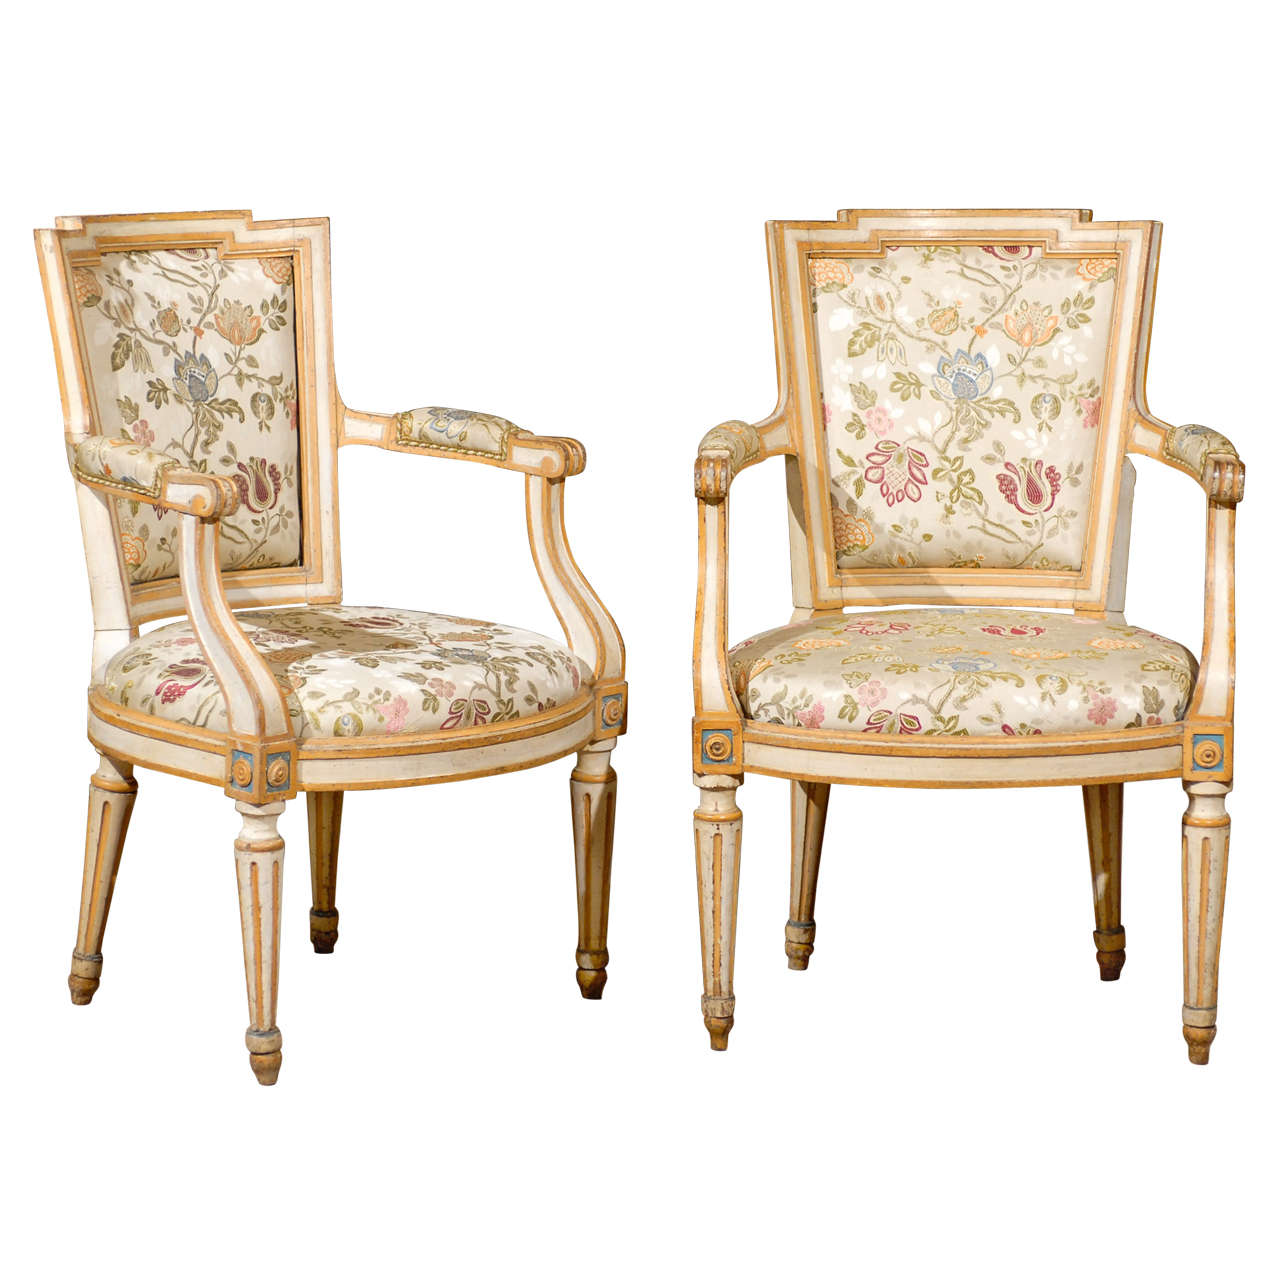 Fine Pair of 18th Century French Louis XVI Painted Fauteuils